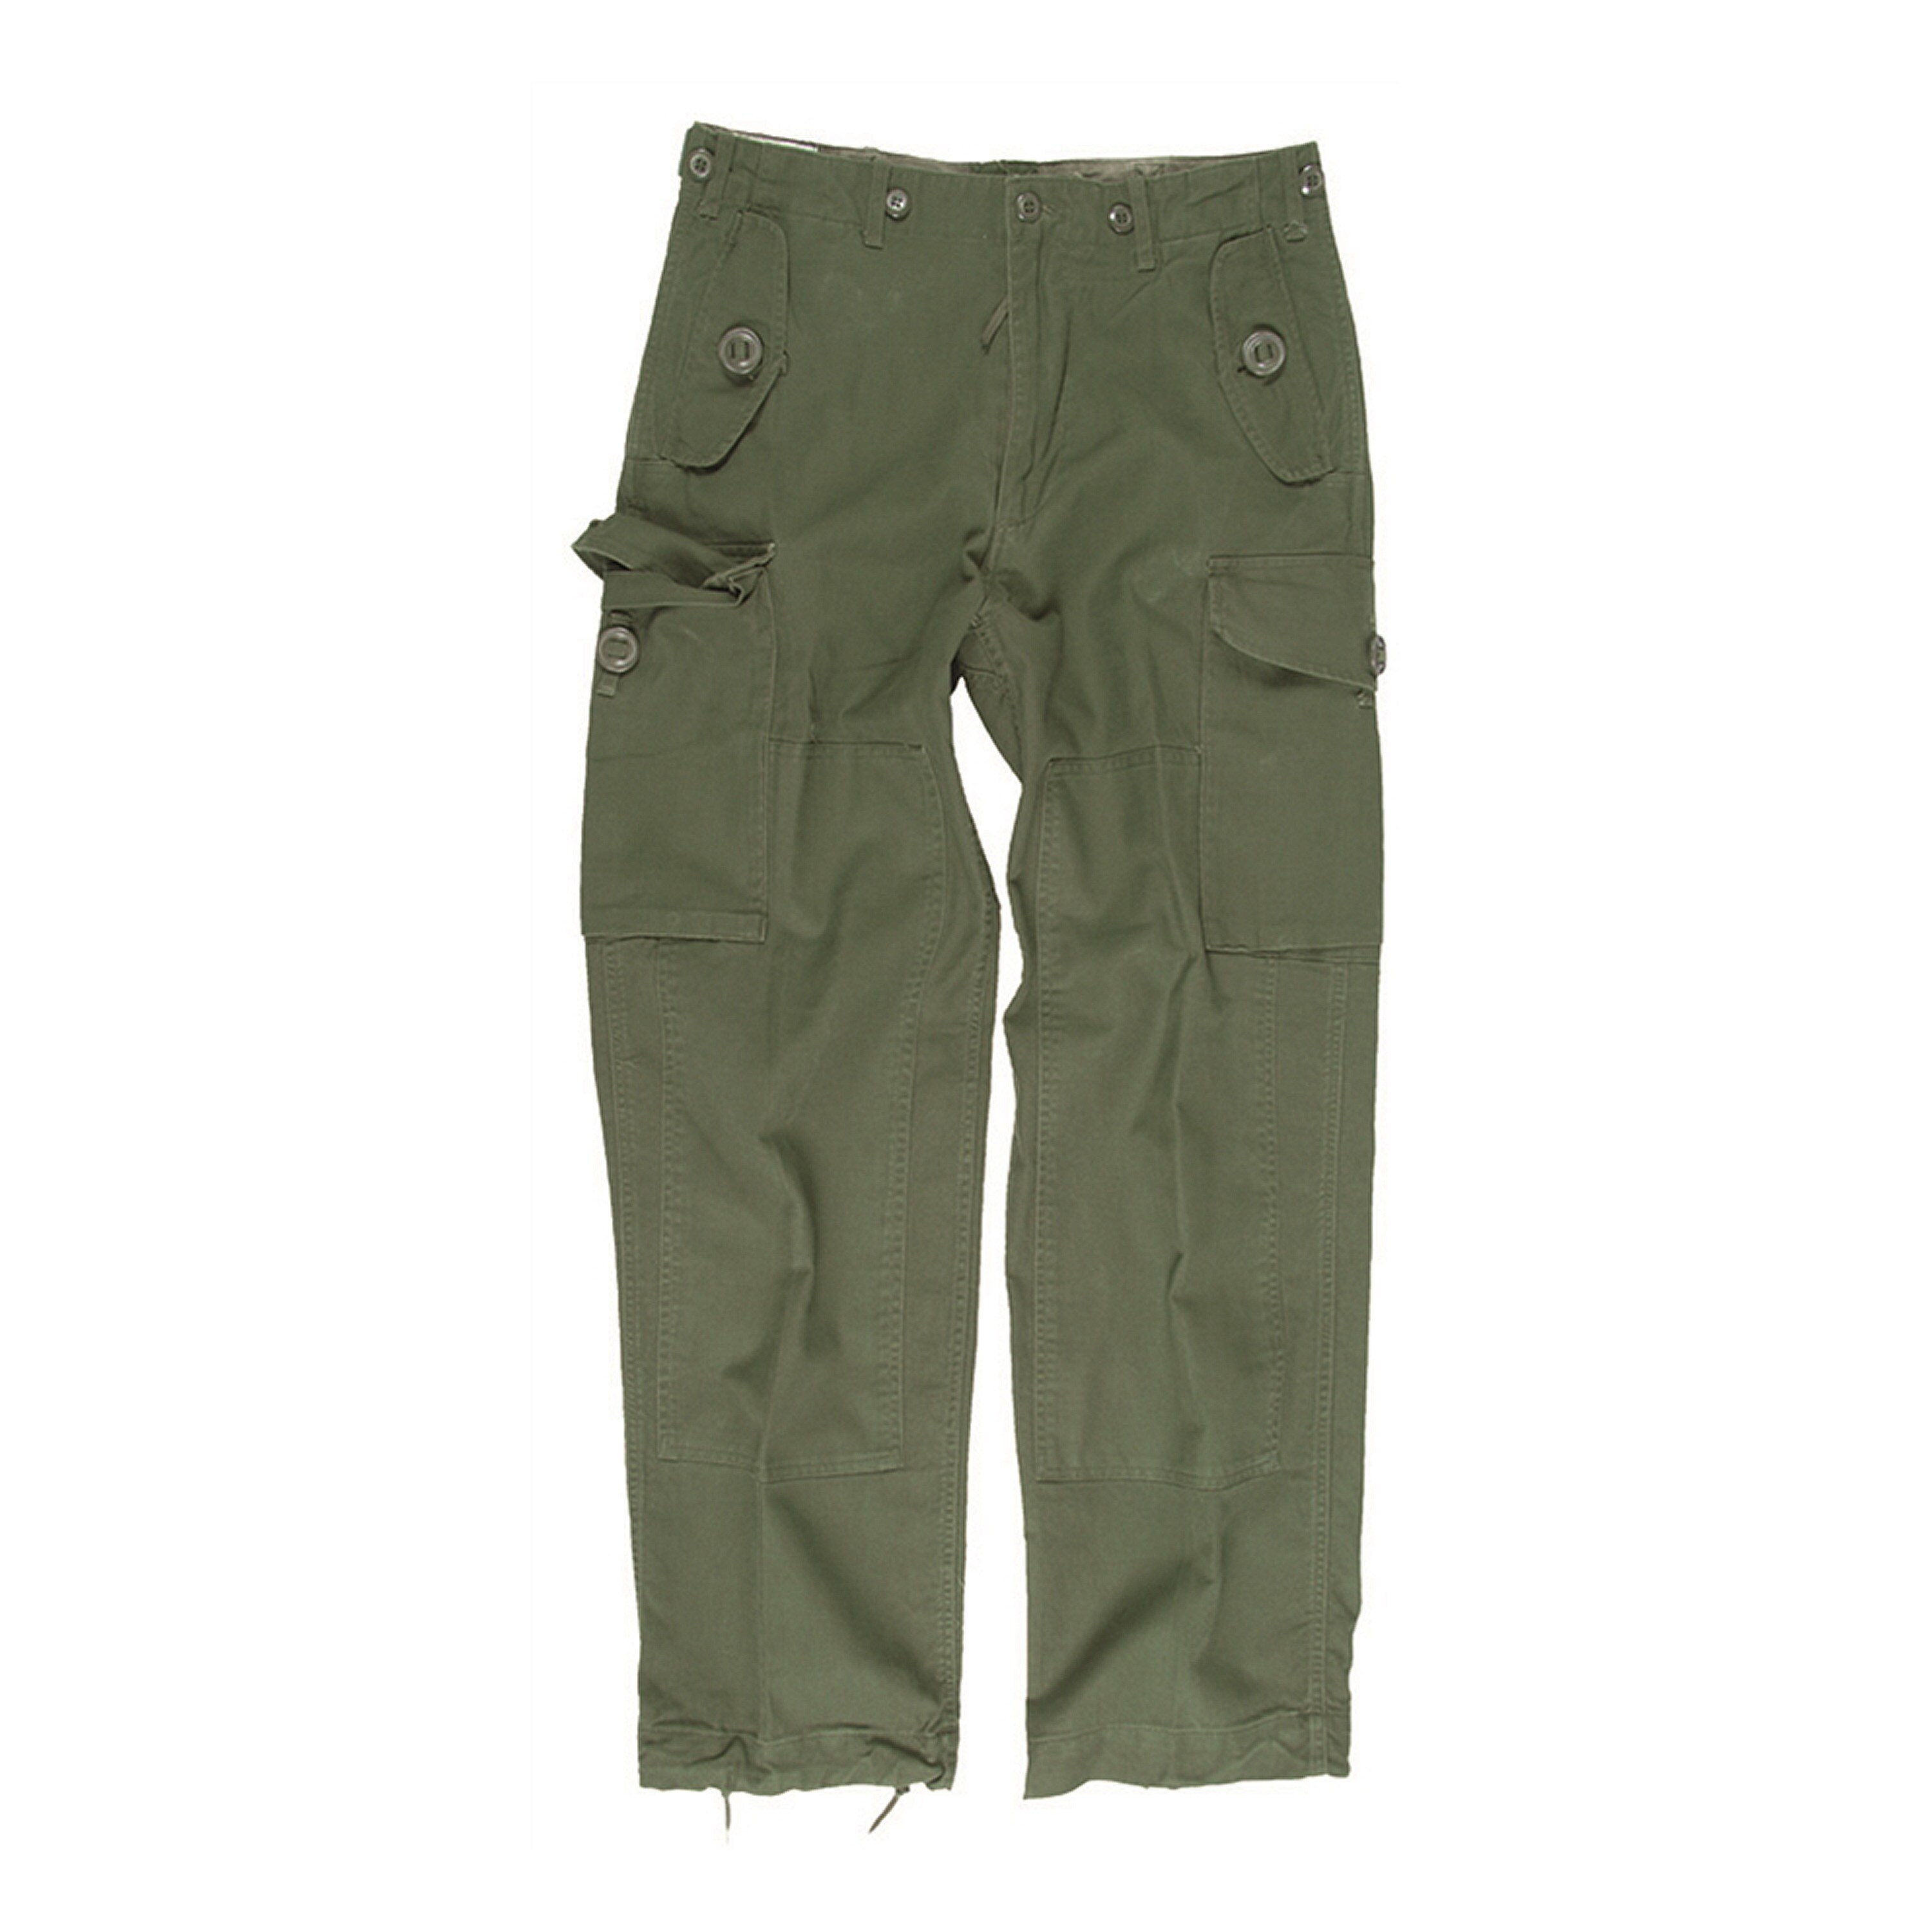 Canadian Field Pants Nyco olive | Canadian Field Pants Nyco olive ...